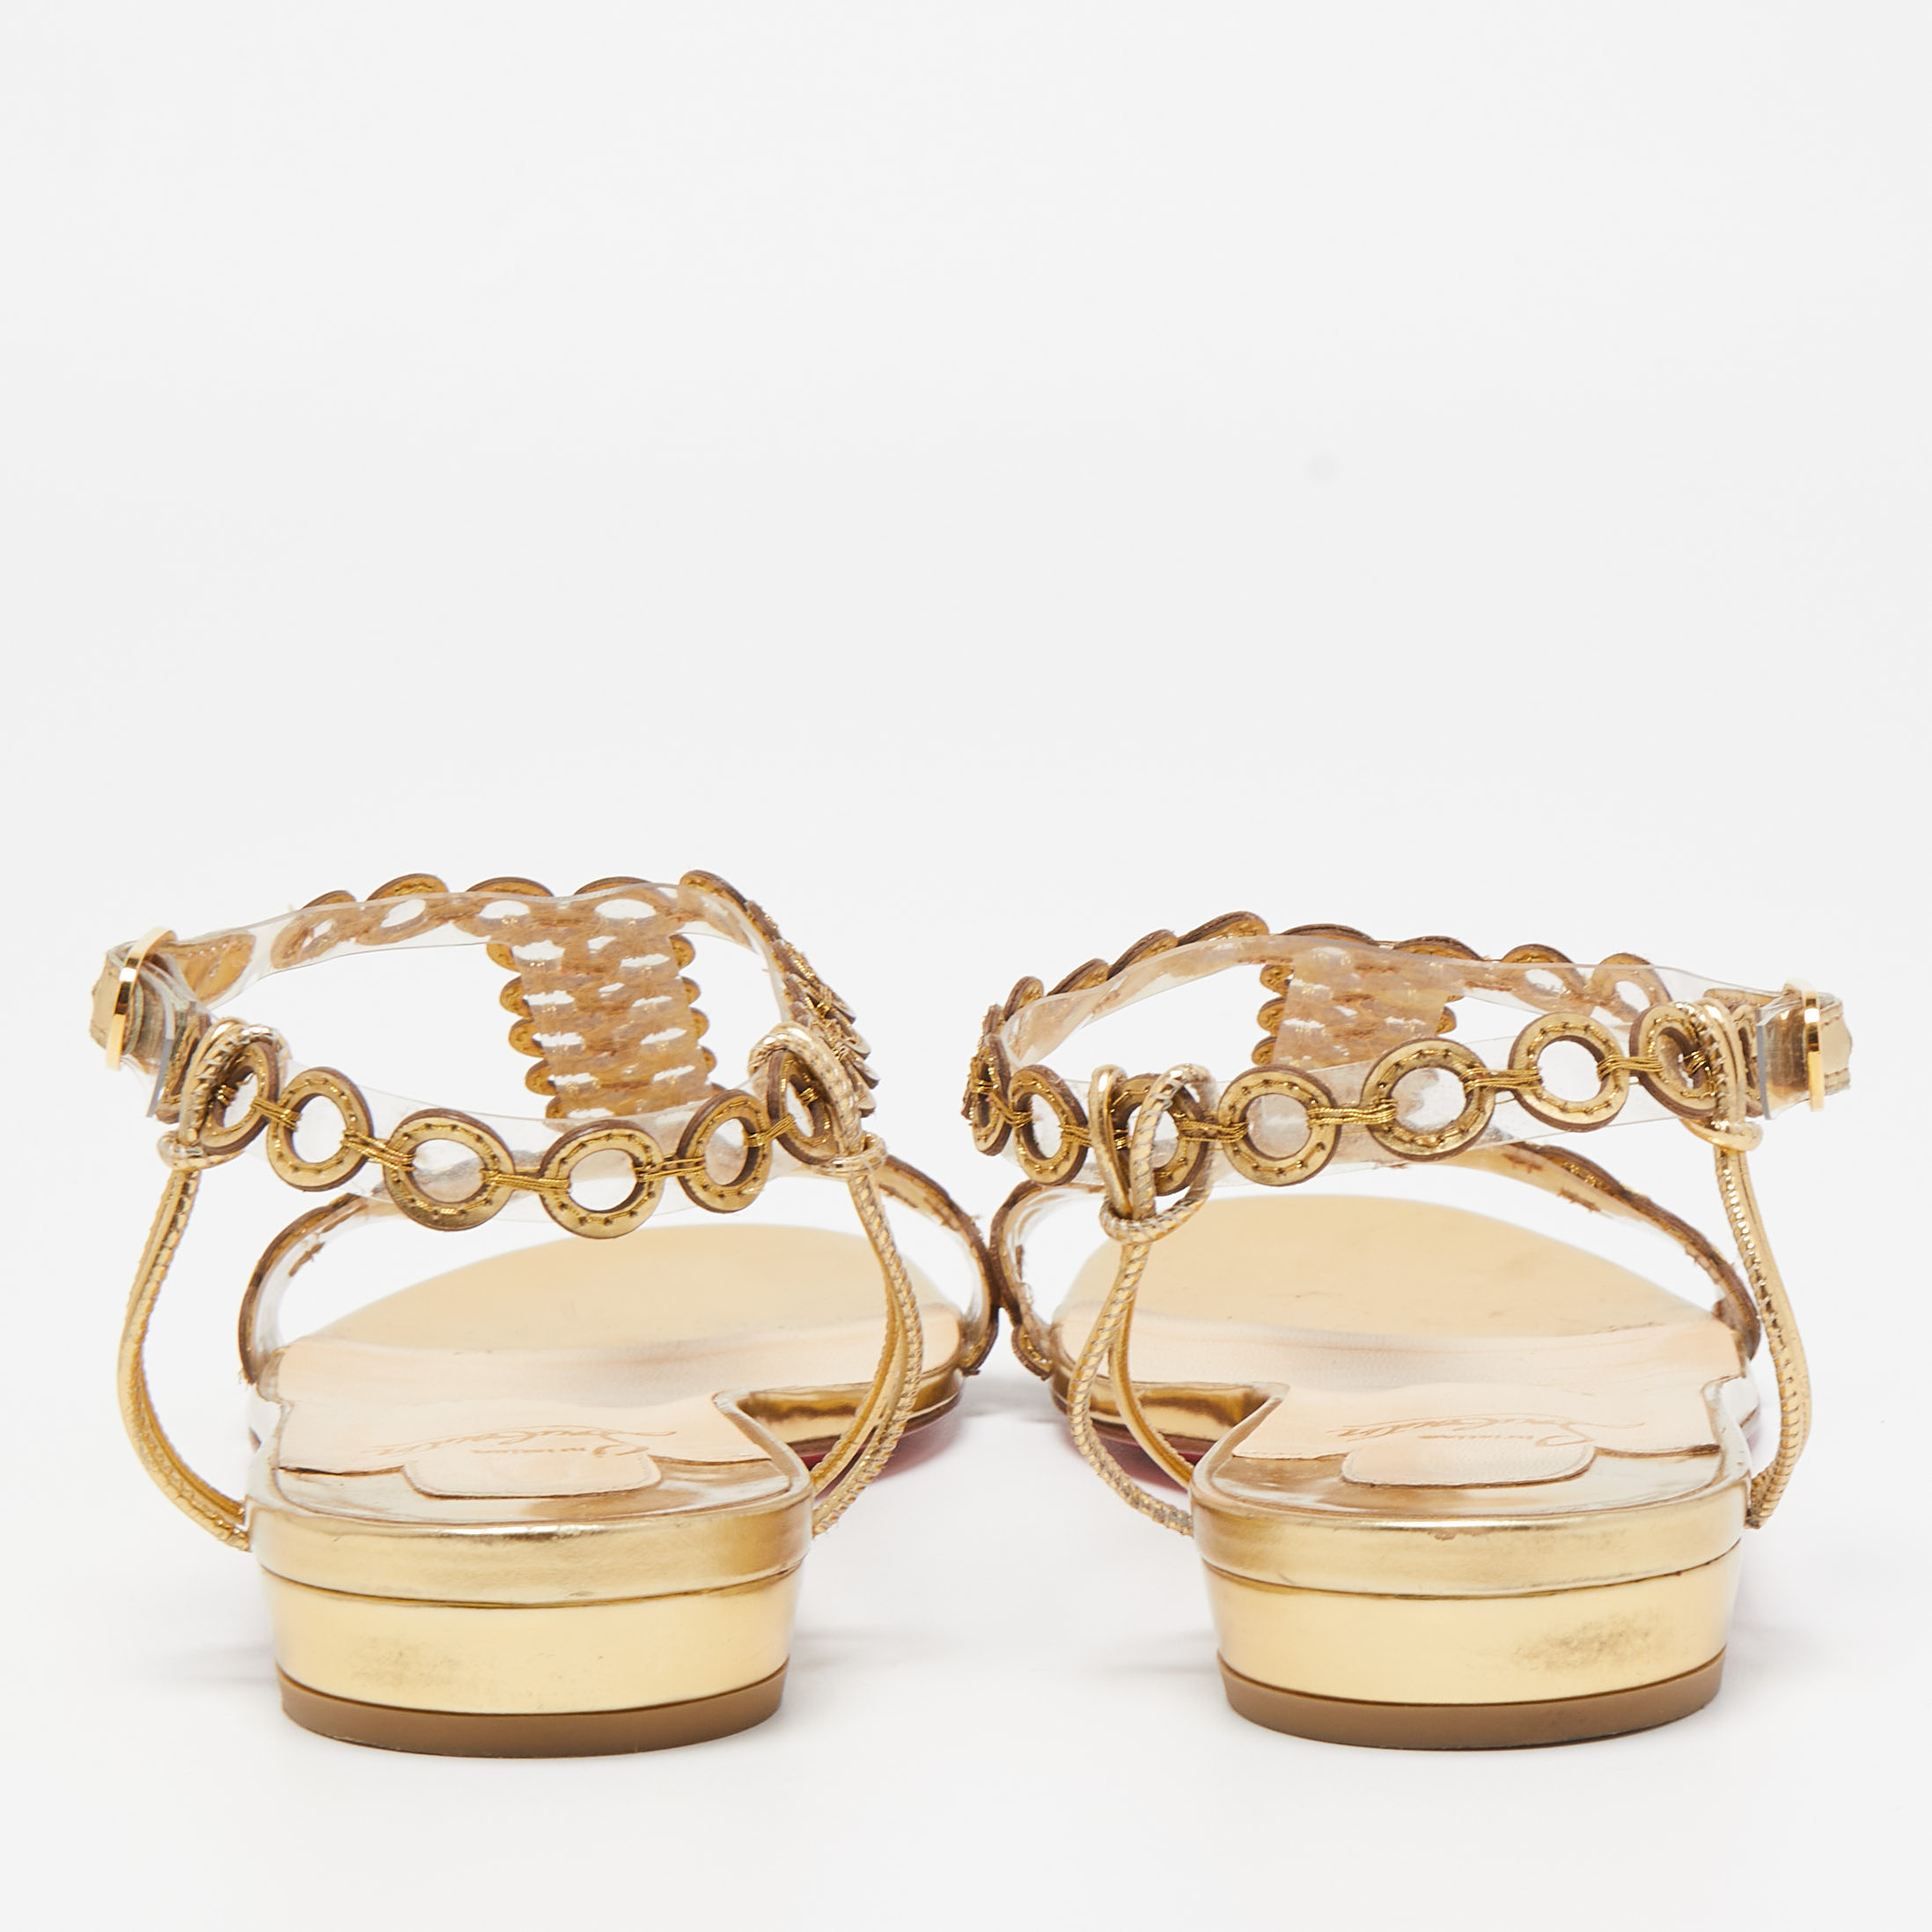 Christian Louboutin Gold Laser Cut Leather And PVC Flat Sandals Size 38.5